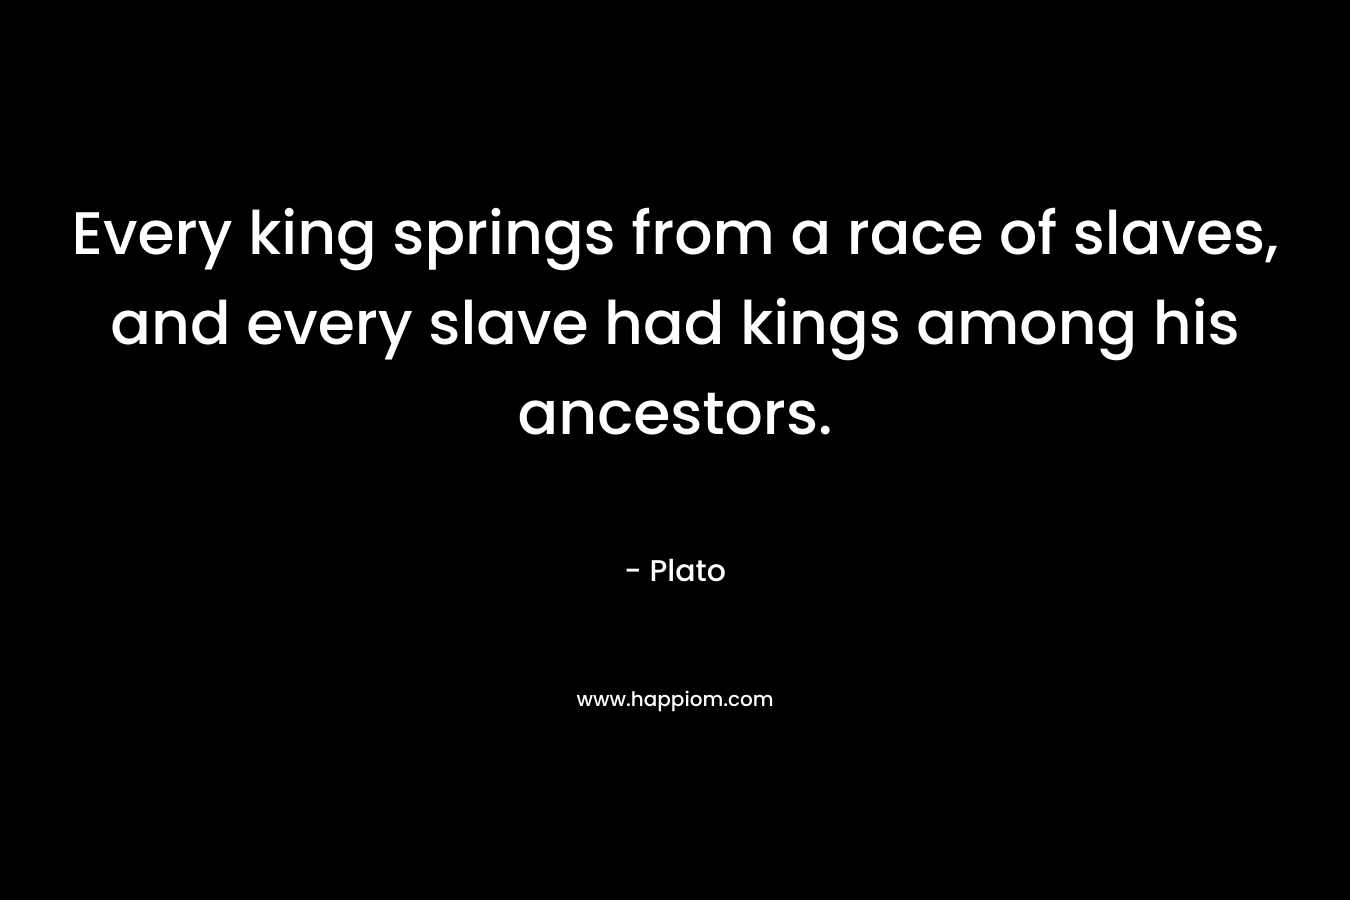 Every king springs from a race of slaves, and every slave had kings among his ancestors. – Plato